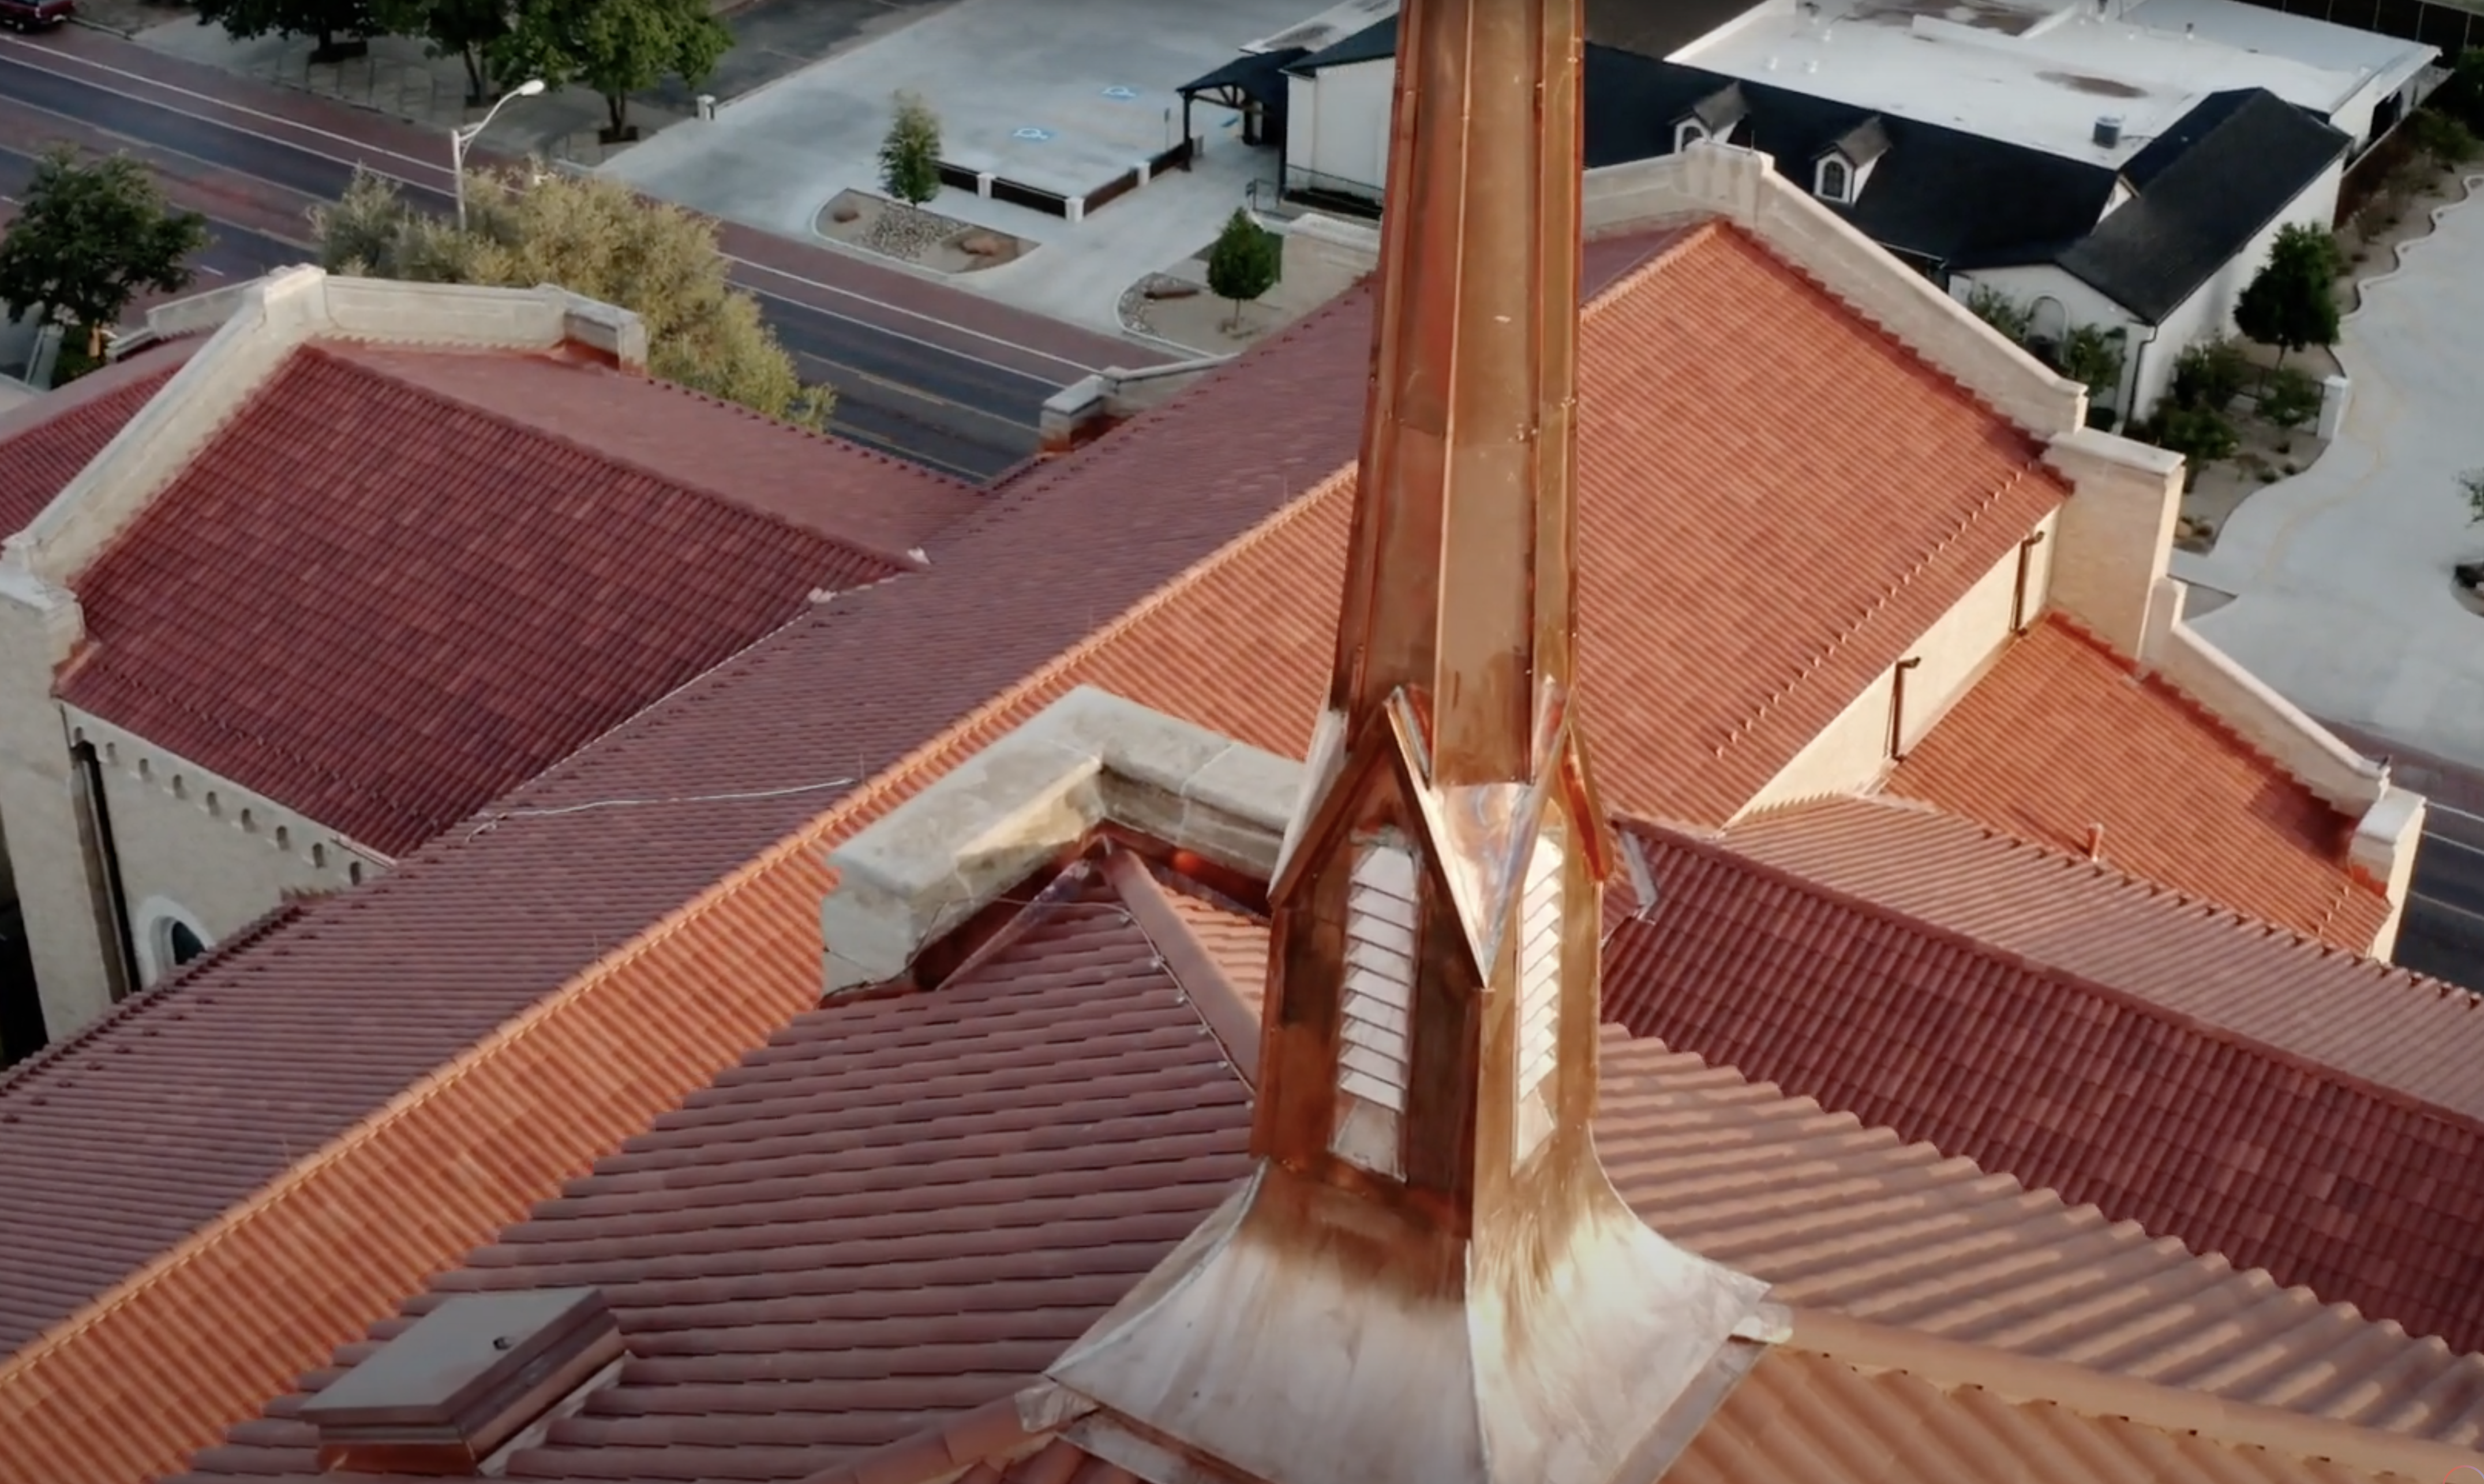 Steeple Copper by the roofing company, precision roofing captured by Cre8ive's Drone Videographers in Lubbock